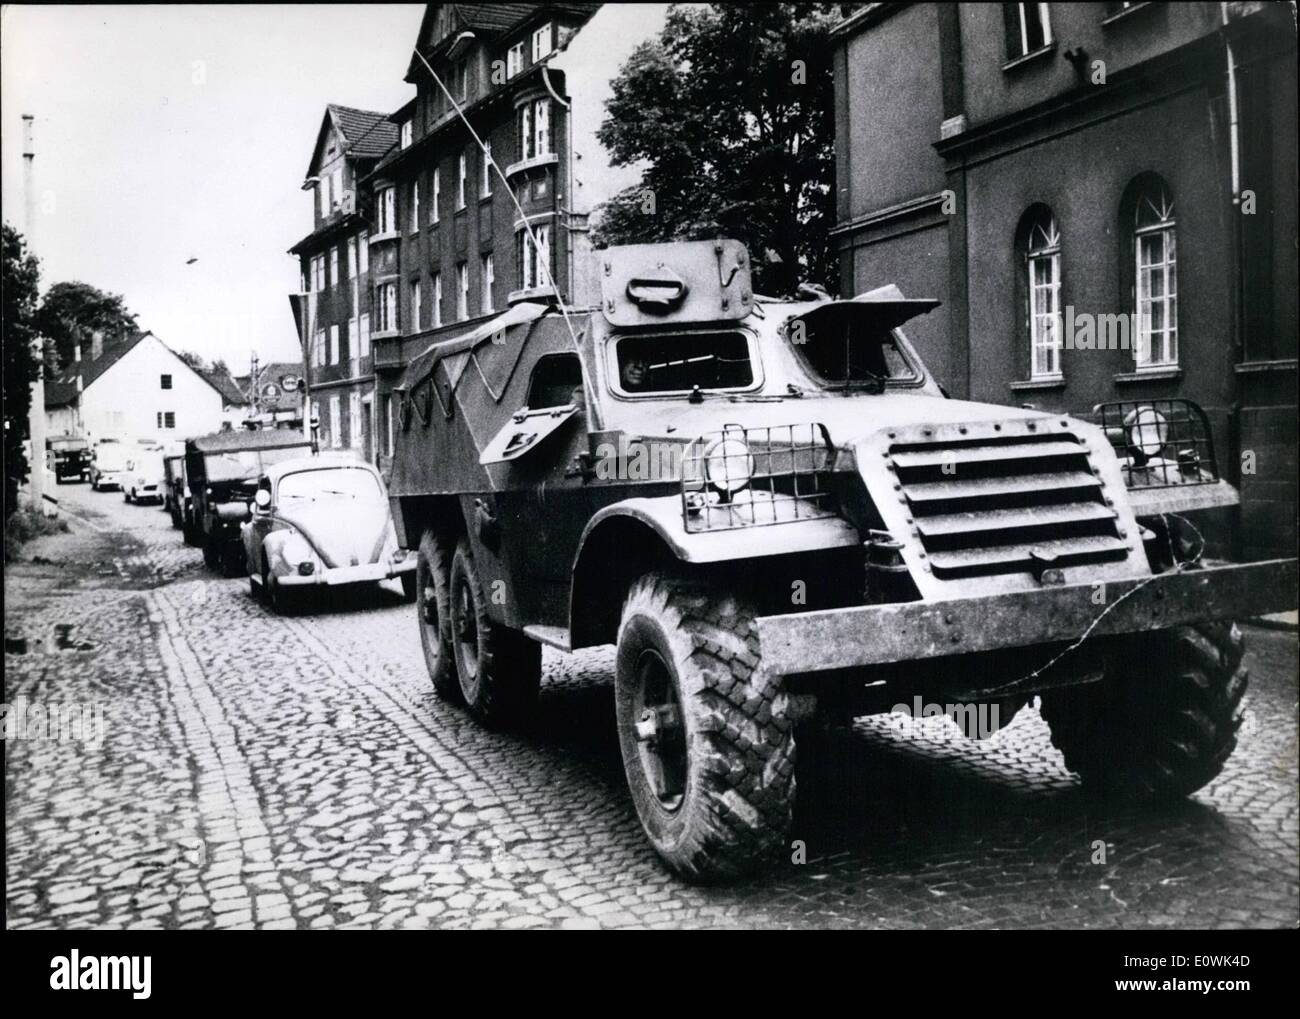 Jun. 06, 1963 - East german soldiers flee to west in armored patrol car: Three soldiers of communist east german army broke through the barbed wire frontier at the zone border near Bad Versfeld just at the time when soviet premier Chruchtschow landed in East Berling for a one weeks visit to communist ruled east germany. After the break-through, the three refugees handed themselves and their armored vehicle to the west German border police at Heringen, from where they were taken to Bad Versfeld. The armored car was driven by a west German border police man Stock Photo